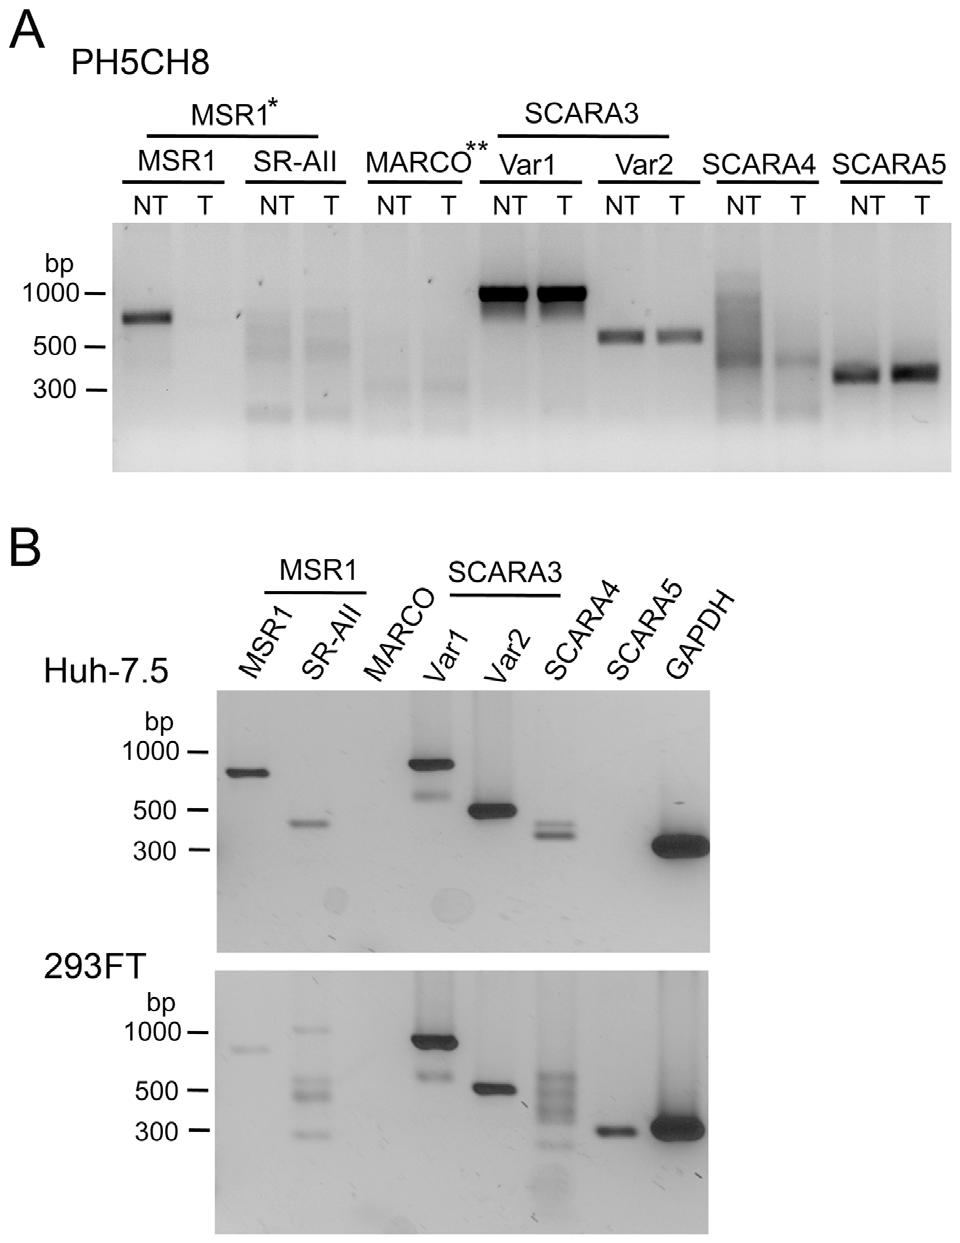 infectious molecular clone of the genotype 2a JFH1 strain (Fig. 1B, upper panel, lanes 1 and 2), and annealed these to produce HCV dsrna (Fig. 1B, lane 3).